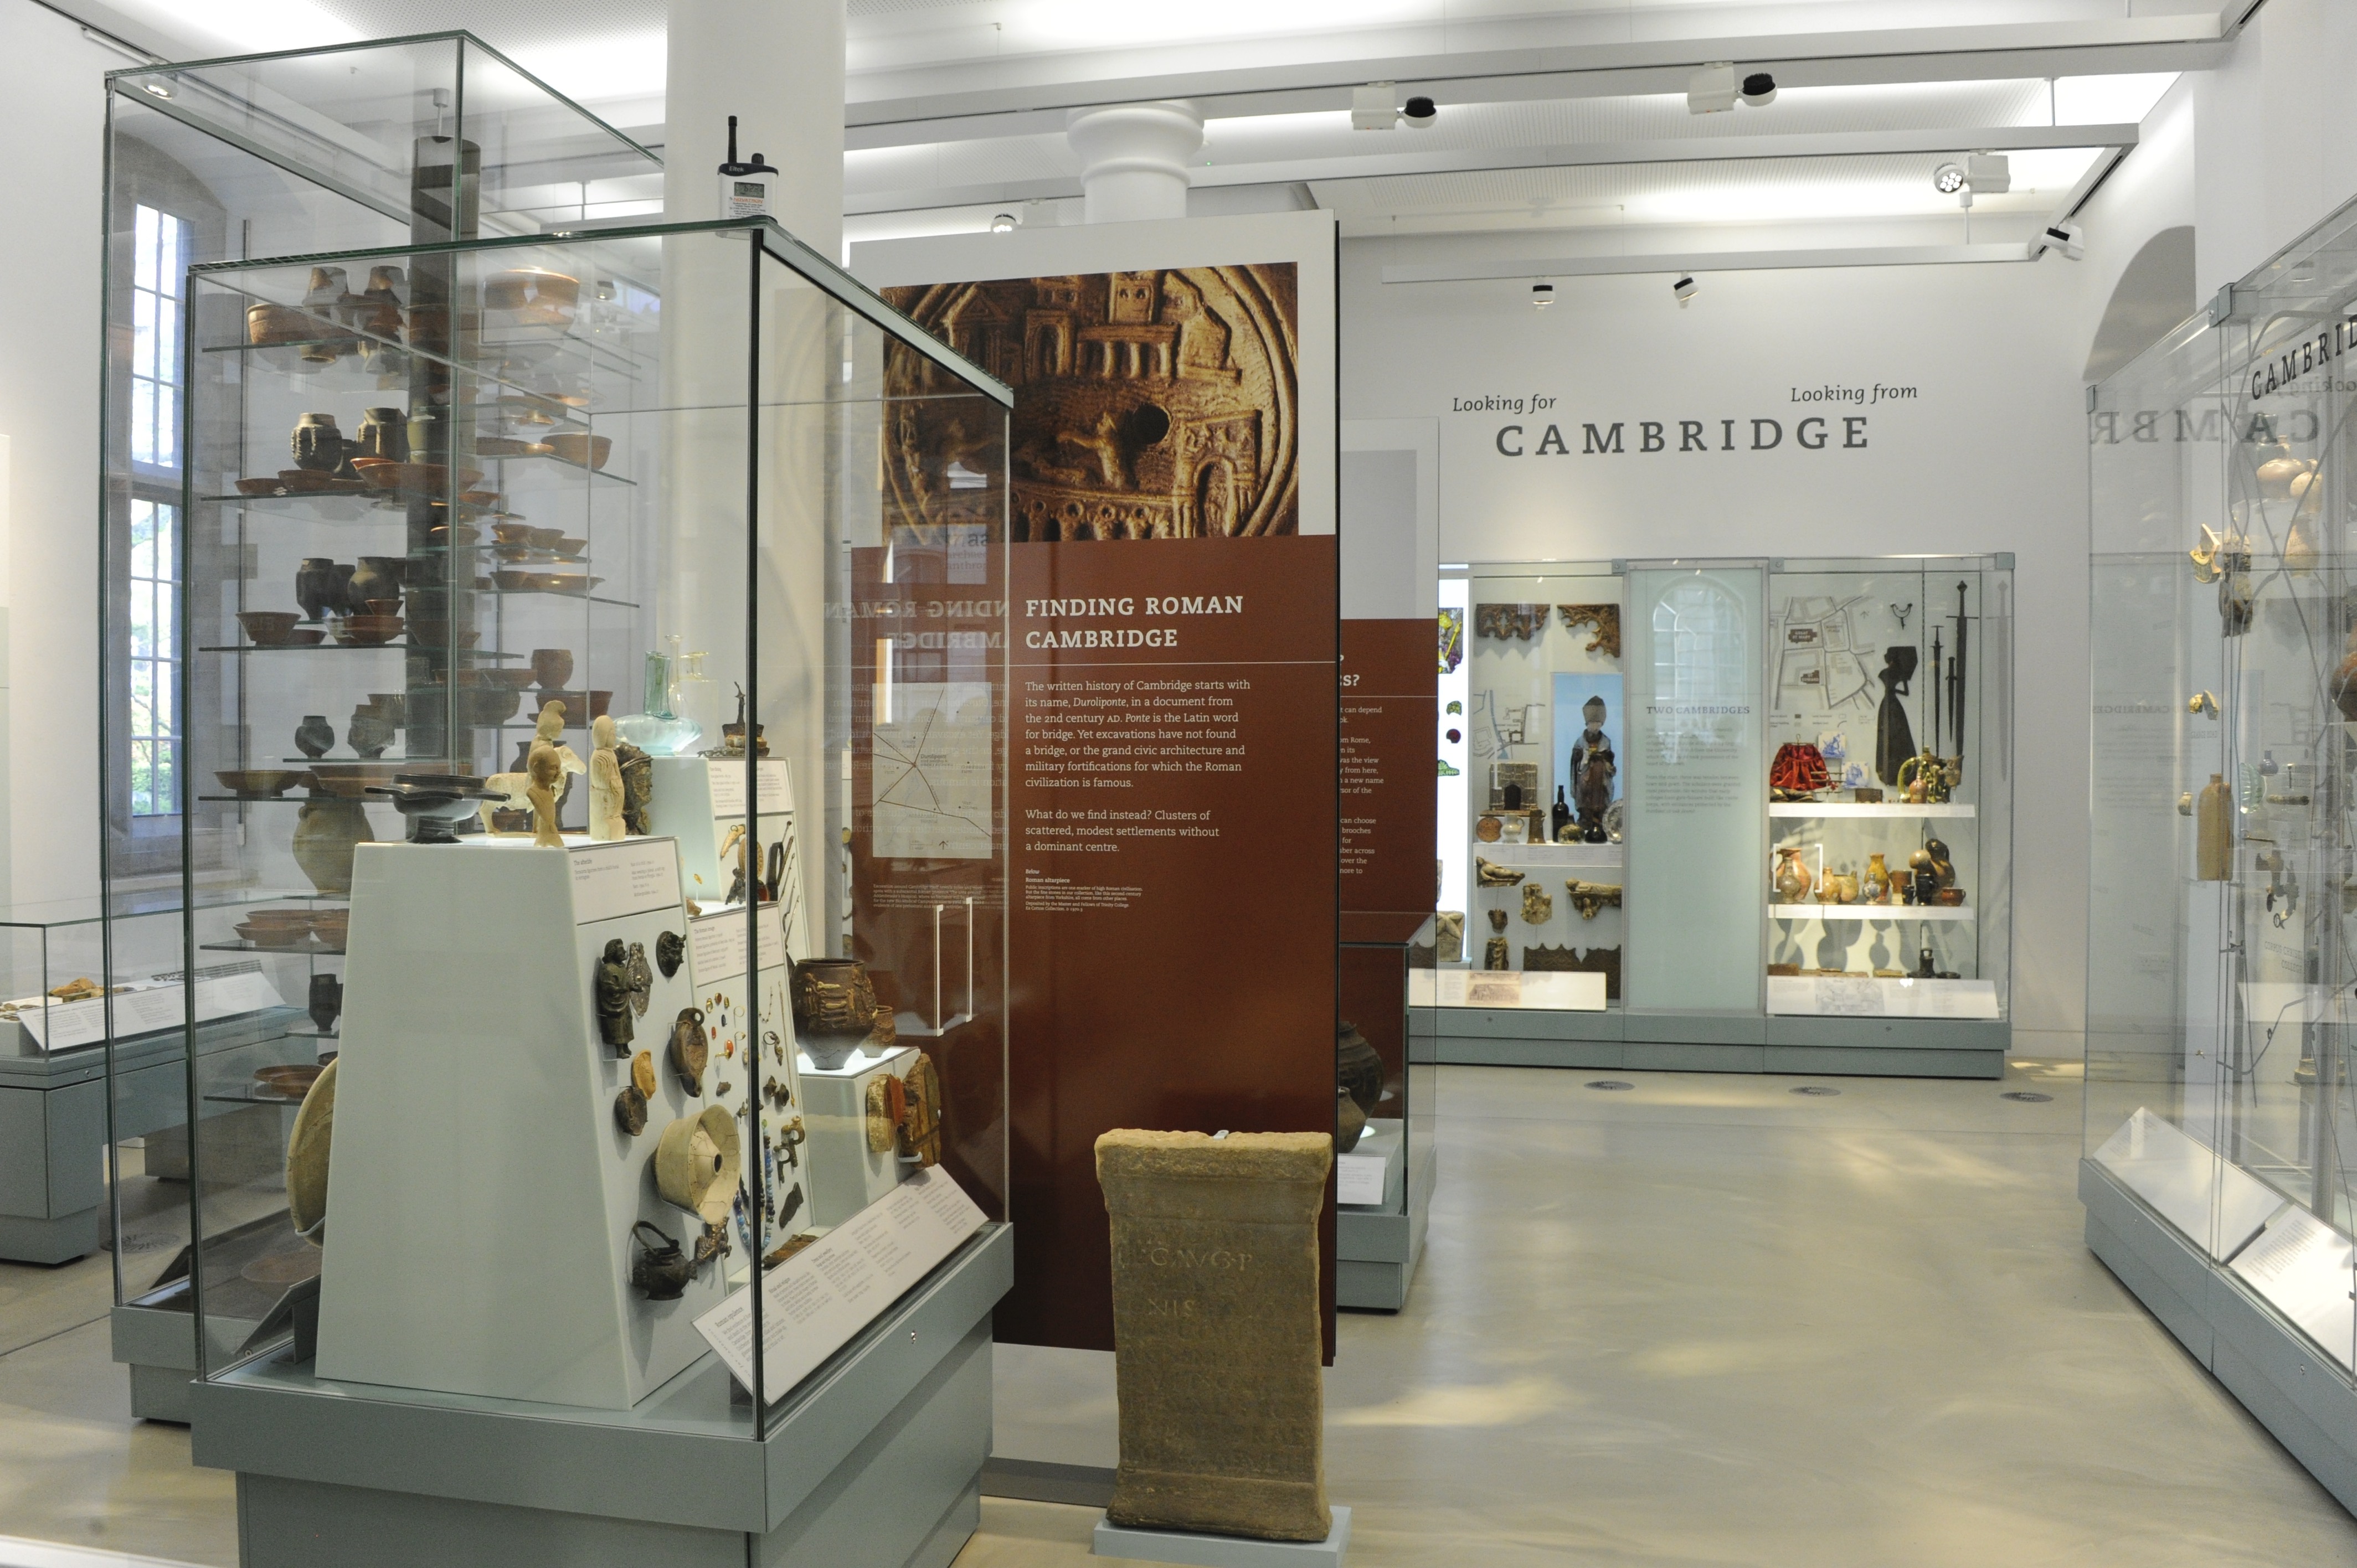 A view of Cambridge Gallery at MAA, with artefacts from across Cambridge visible